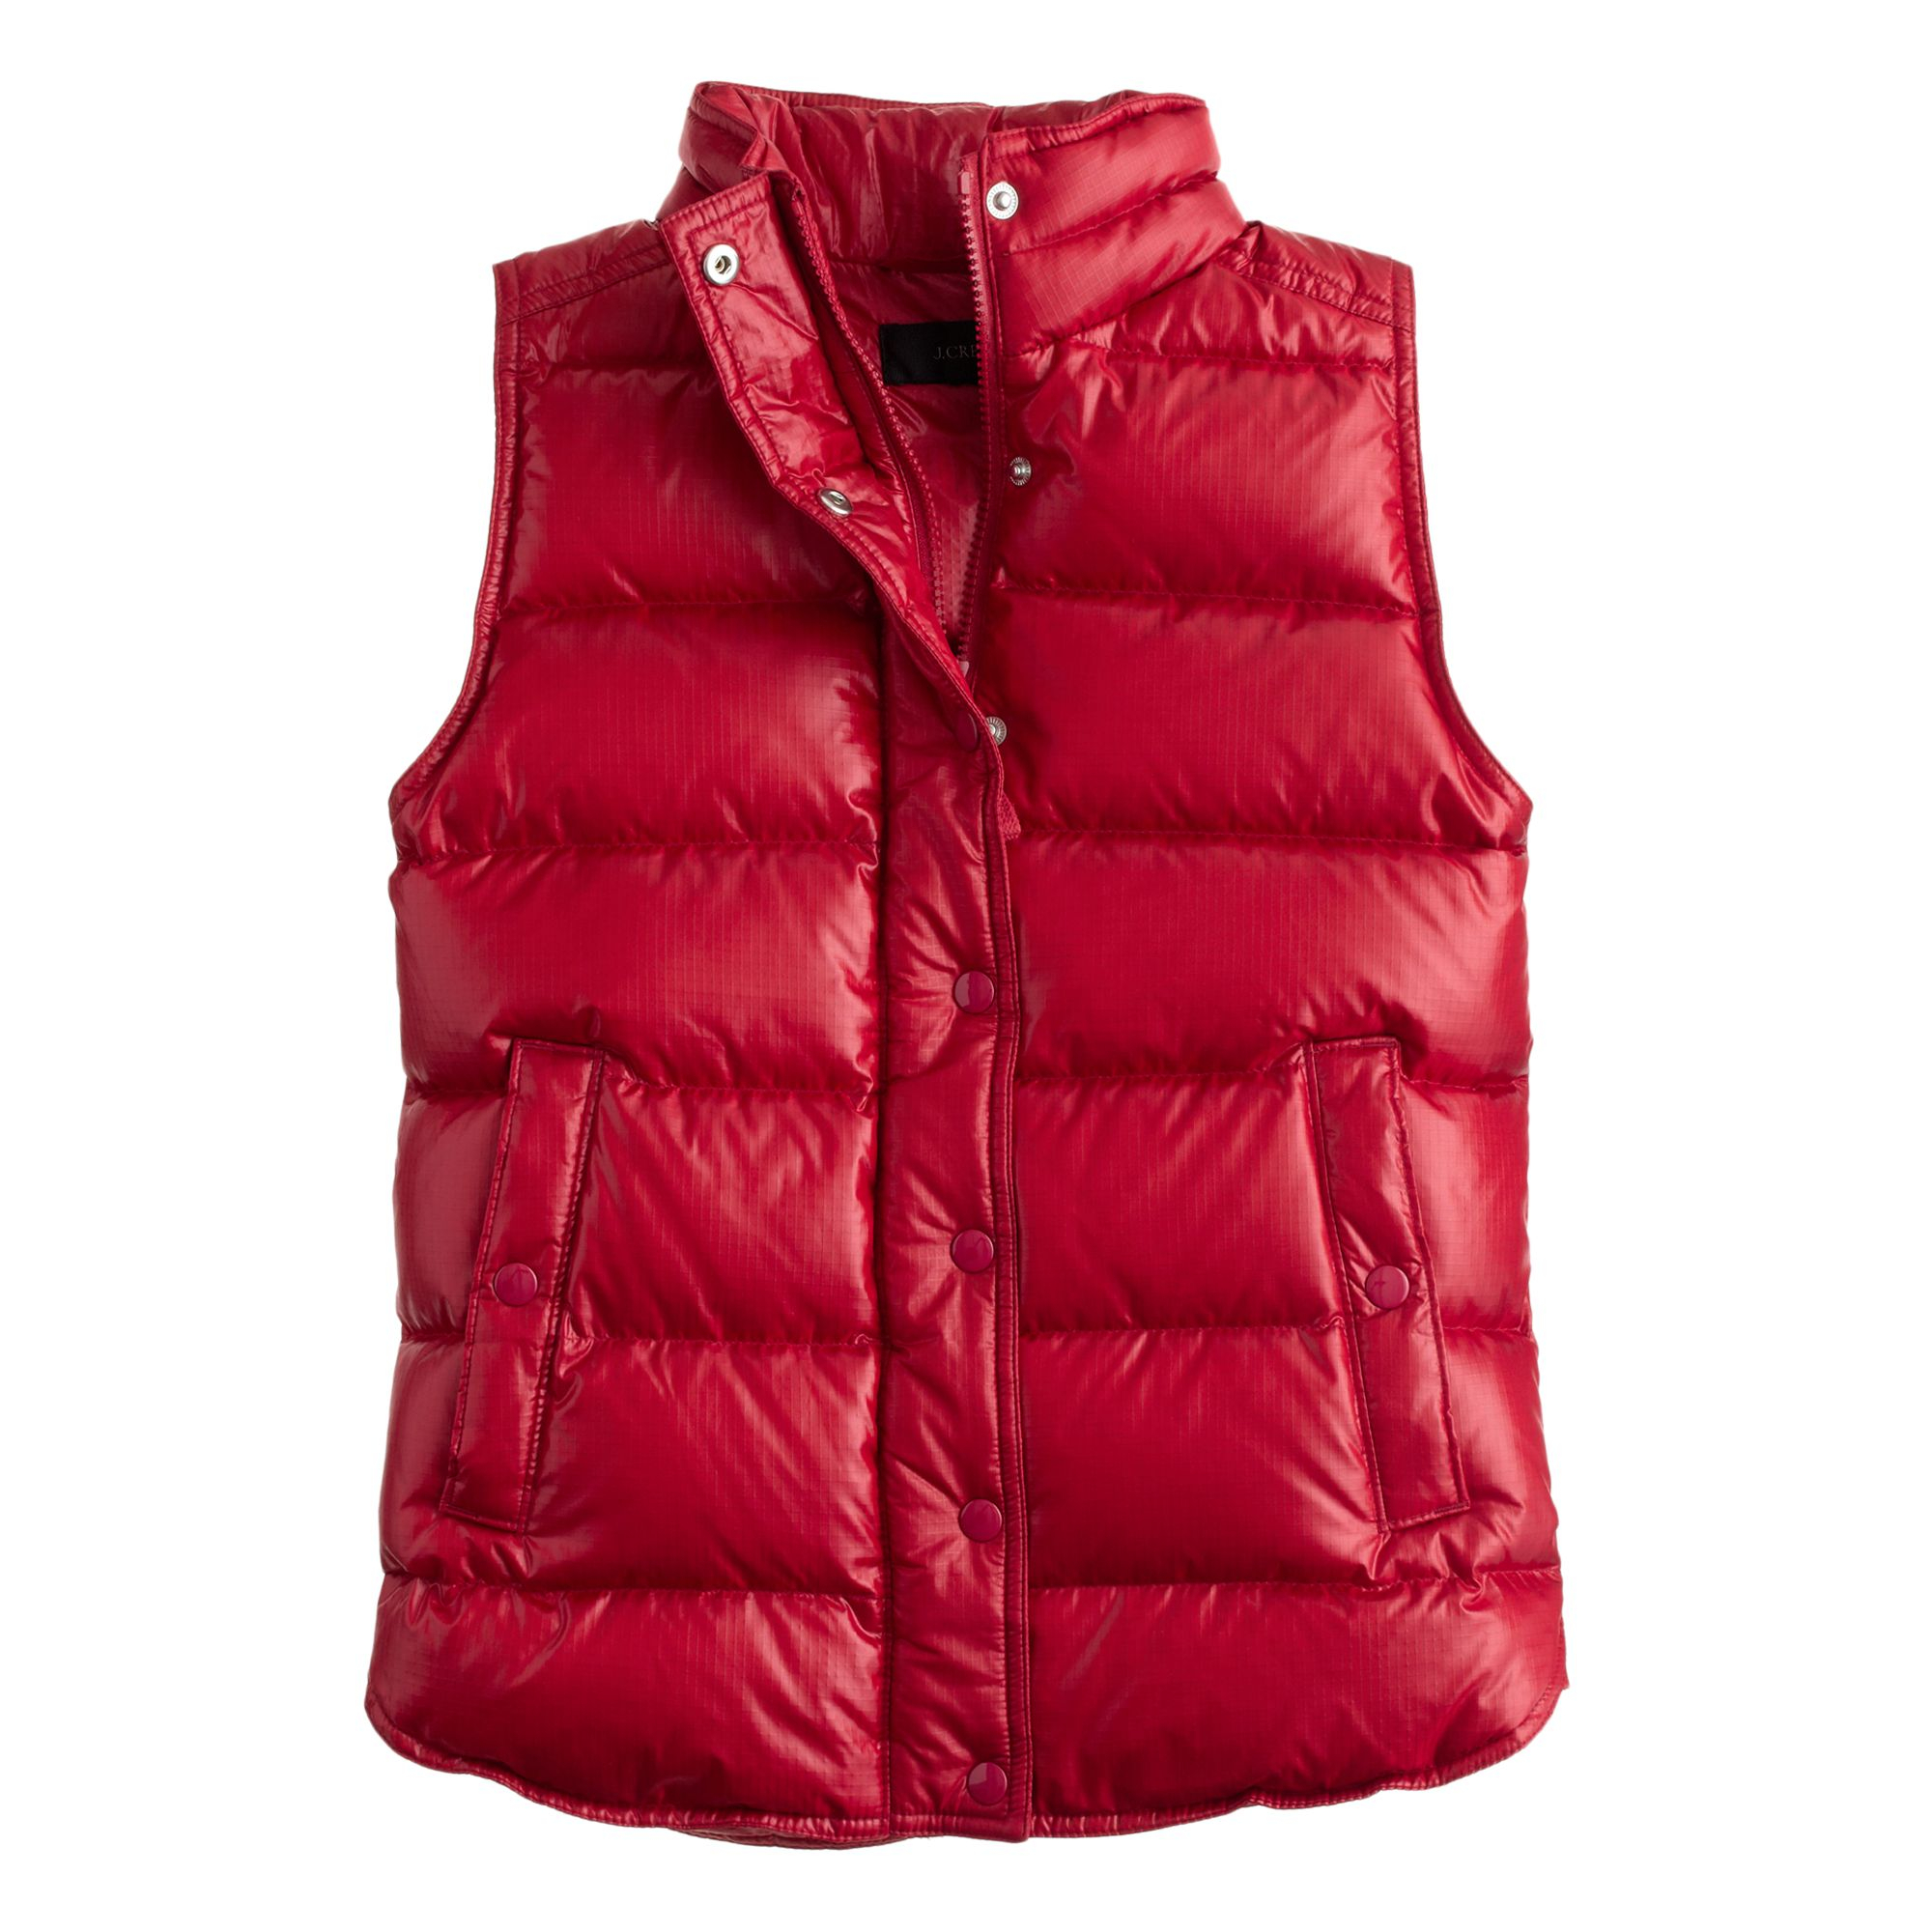 J.crew Shiny Puffer Vest in Red (roasted pepper) | Lyst